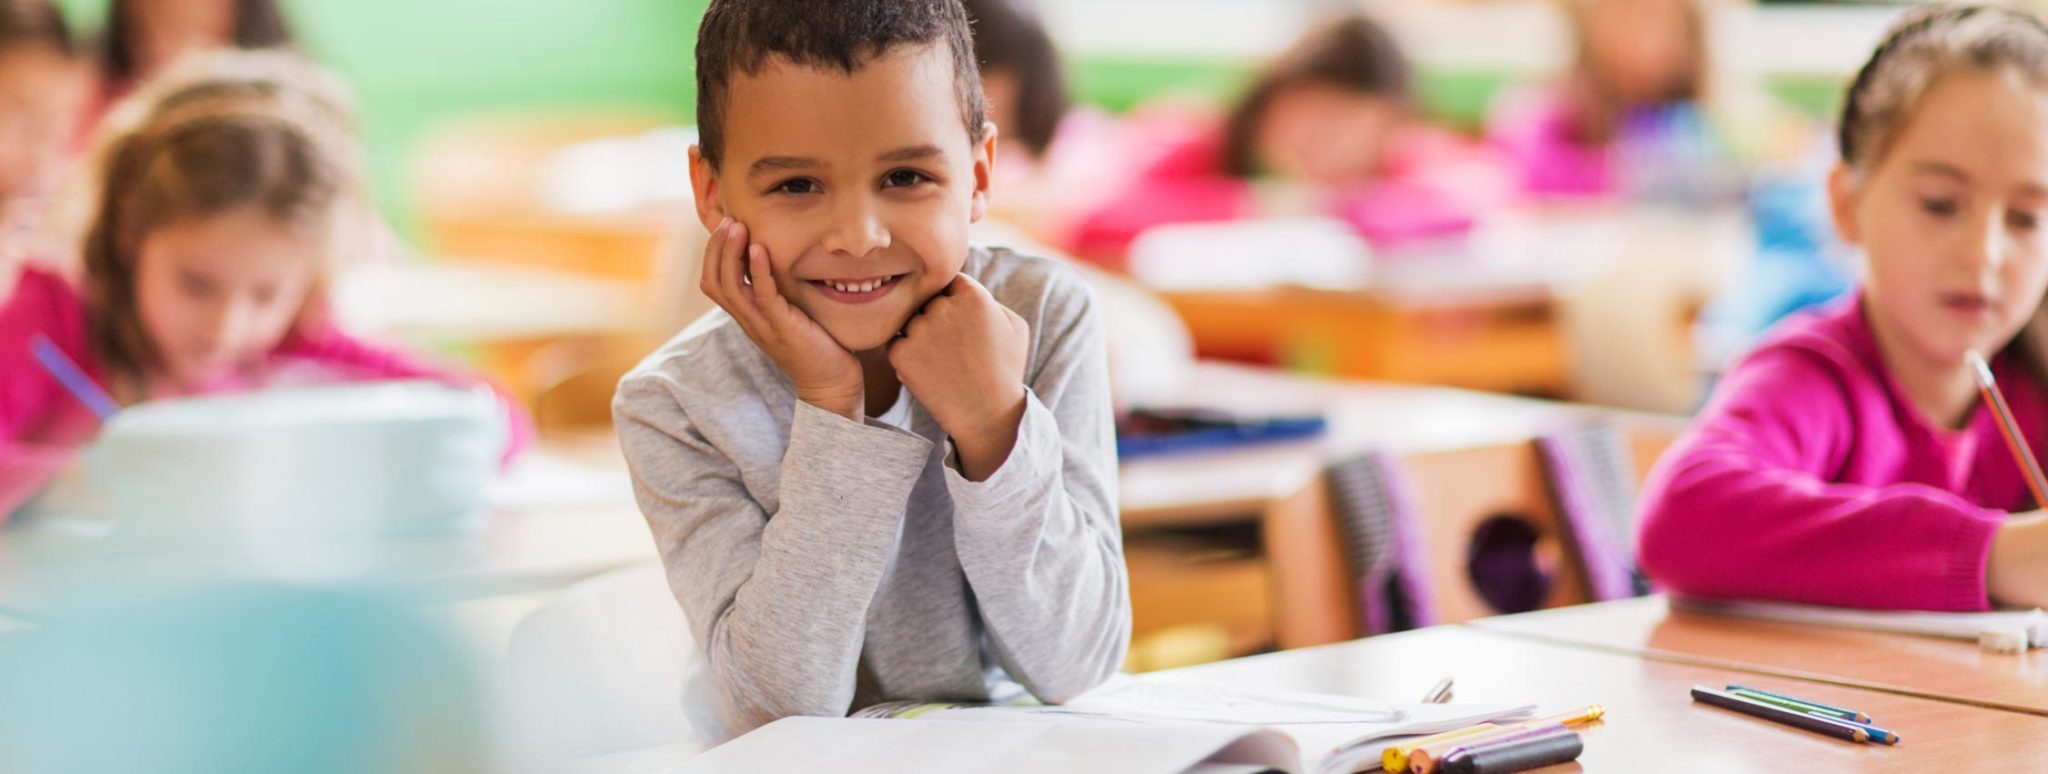 How to Help Your Child Adjust to a New School